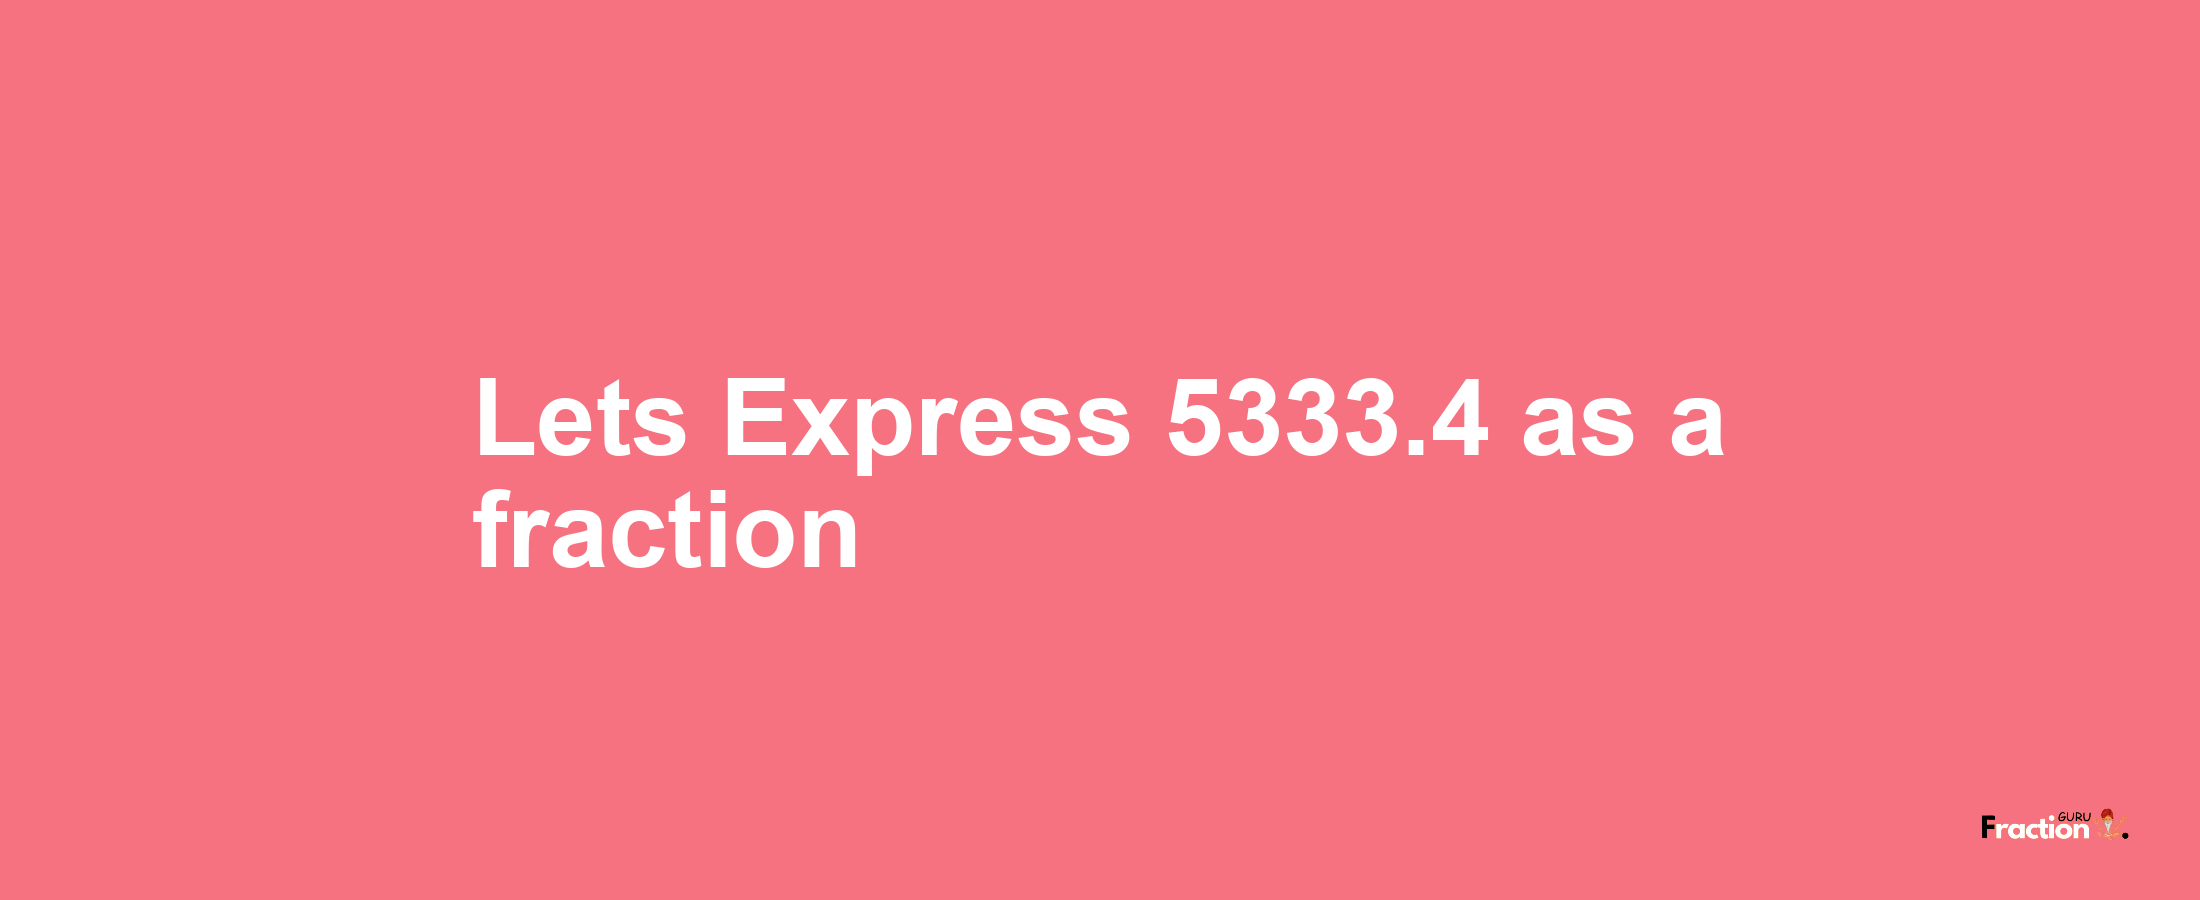 Lets Express 5333.4 as afraction